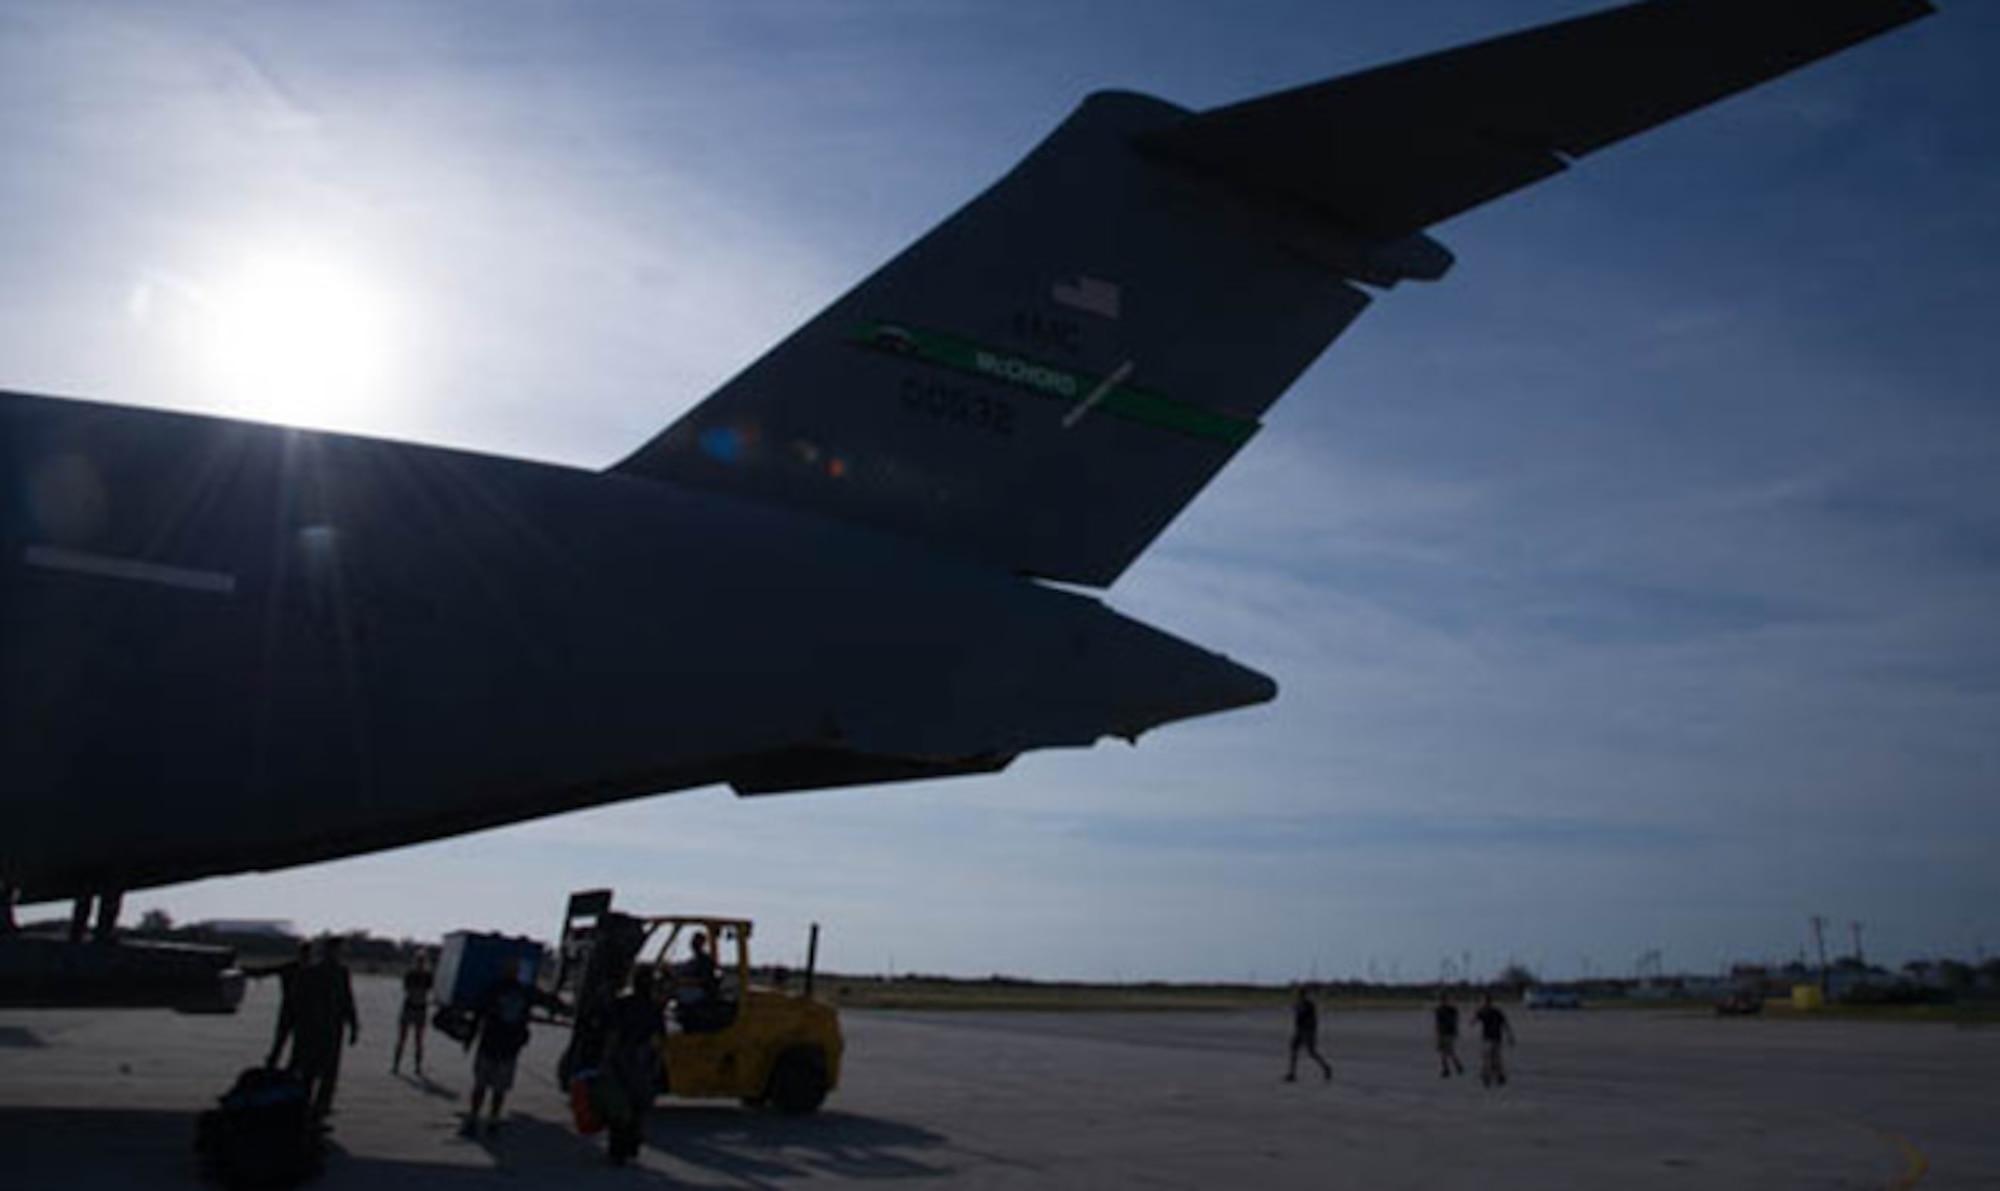 Dolphins from the U.S. Navy’s Marine Mammal Program are unloaded from a C-17 Globemaster III, operated by the 446th Airlift Wing, March 13, 2017. The dolphins, with trainers and veterinarians, were being transported from San Diego to Key West, Florida. (U.S. Air Force photo by David L. Yost)